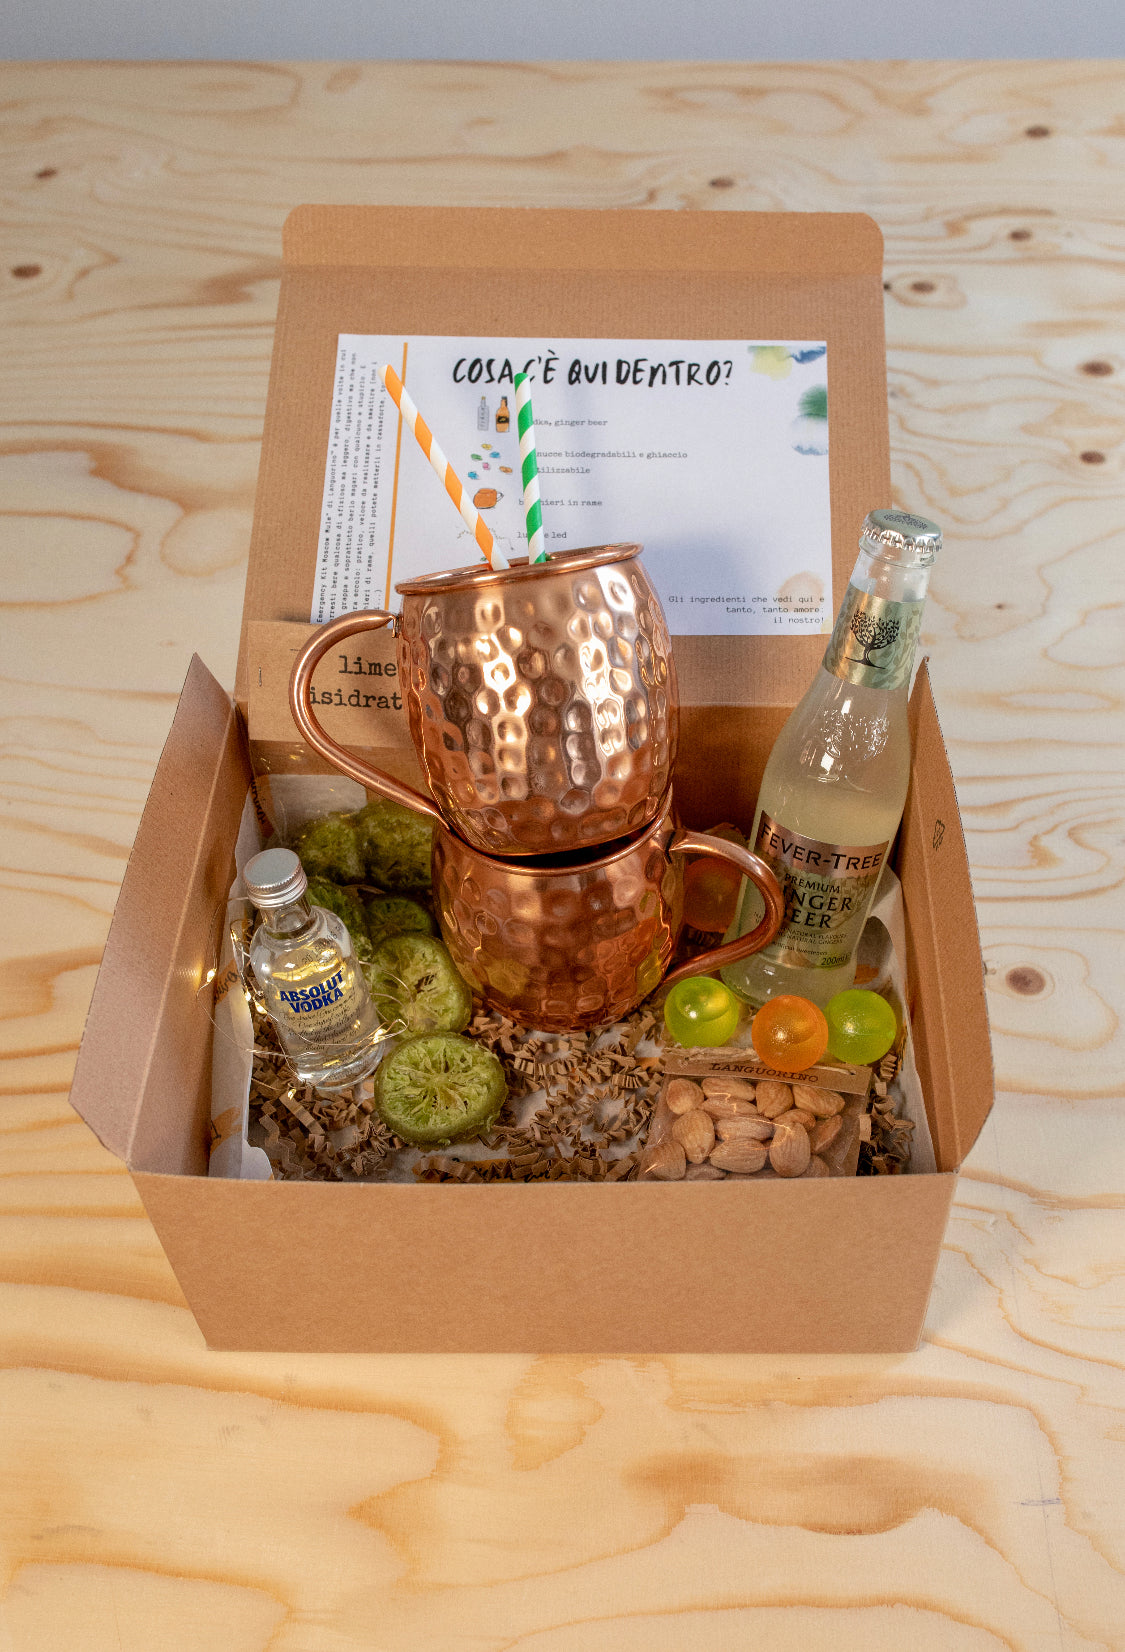 Kit Moscow Mule